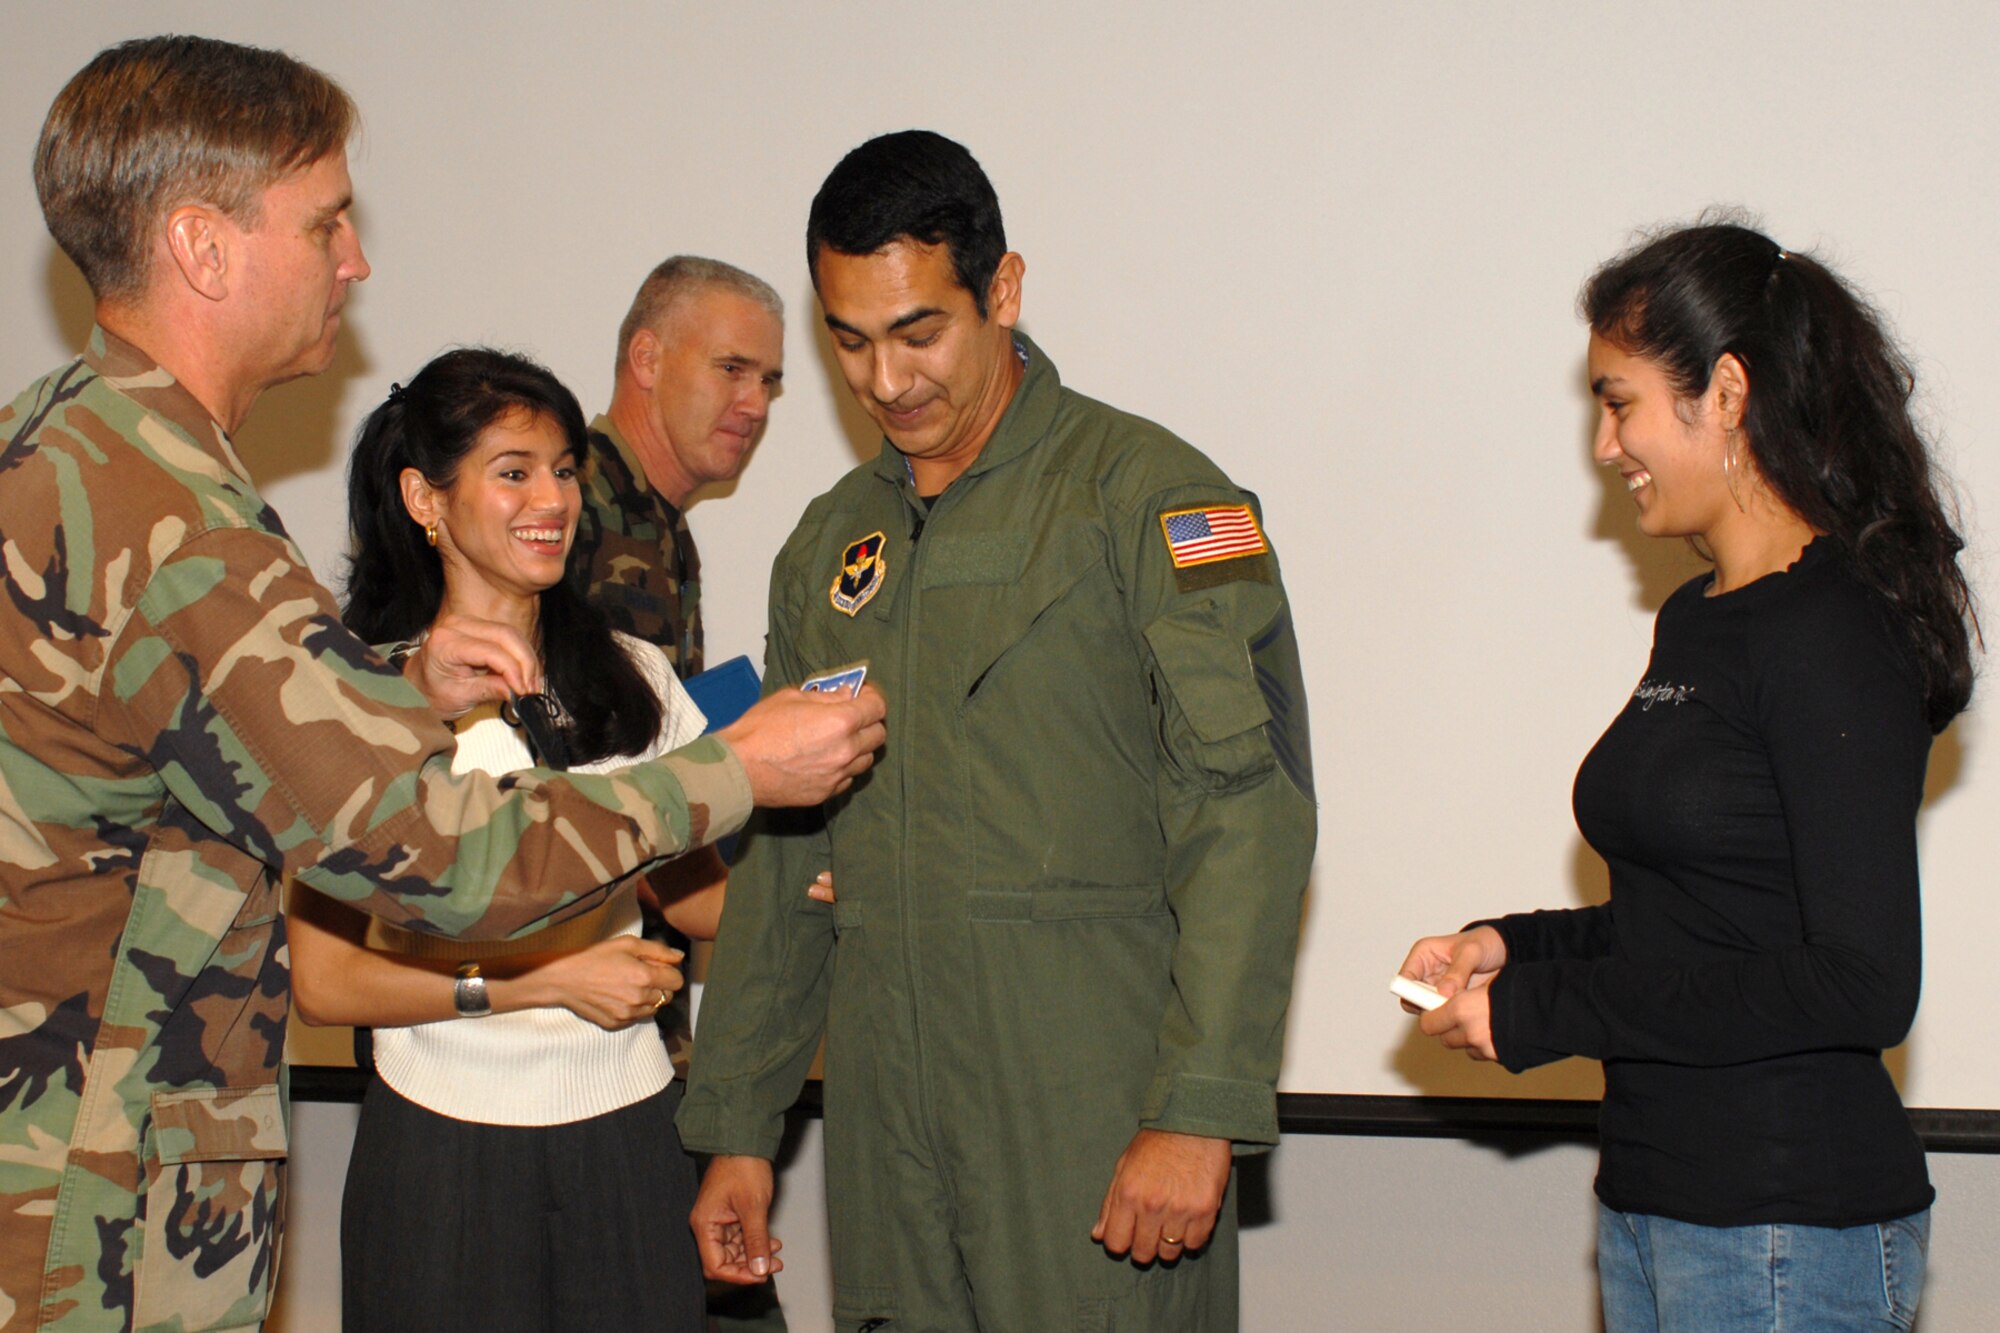 Brig. Gen. Kip Self, (left) 314th Airlift Wing commander, installs a new flight patch on newly promoted Master Sgt. Richard Pinedo, 62nd Airlift Squadron, during his STEP promotion Dec. 18, as his wife, Sarah, and daughter, Mari, look on. The Stripes To Exceptional Performers program allows the 314th Airlift Wing commander to promote individuals who have gone above and beyond in the line of duty. (Photo by Airman 1st Class Christine Clark)